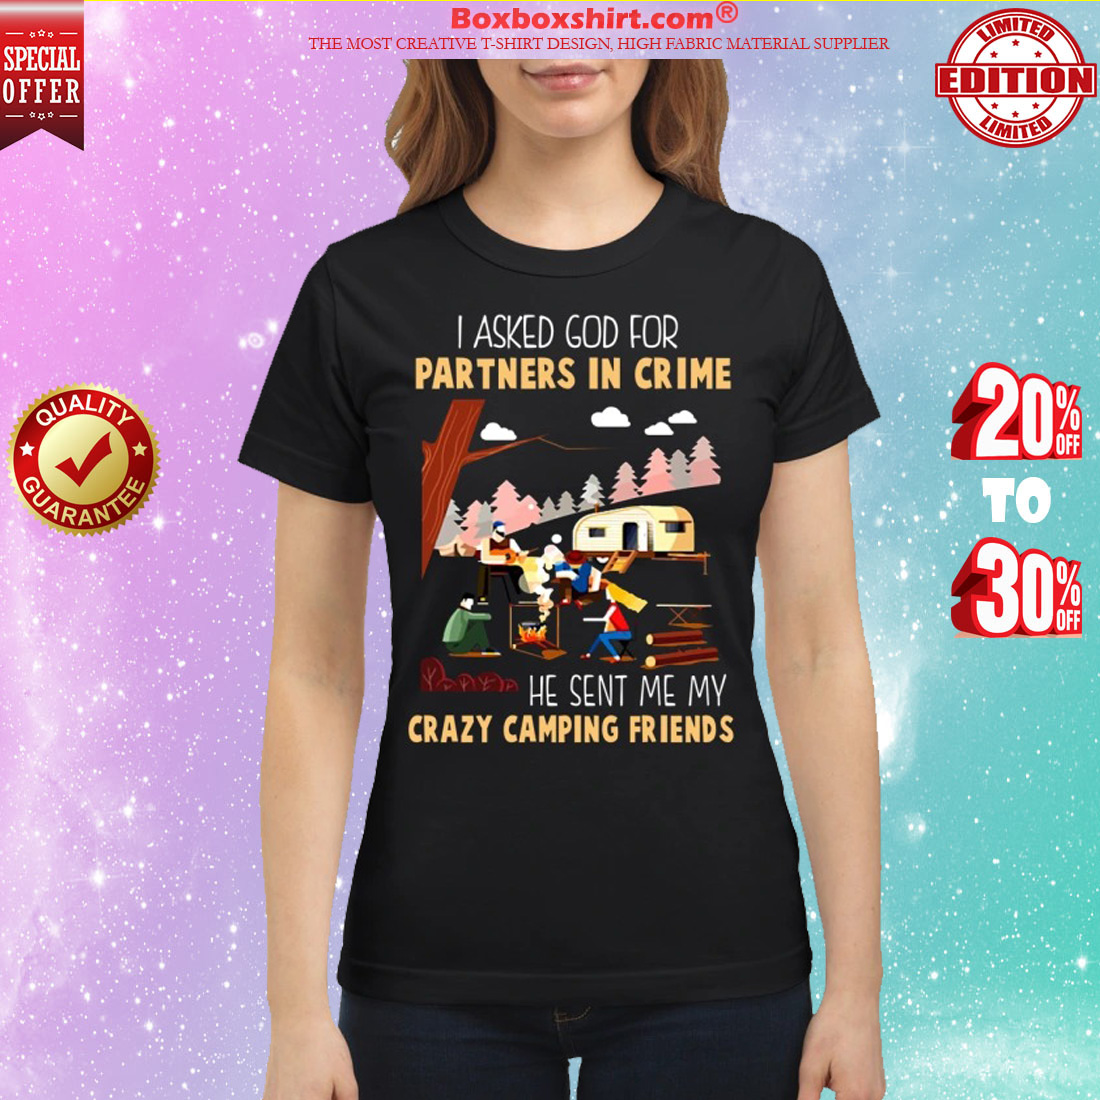 I asked god for partners in crime he sent me my crazy camping friends classic shirt